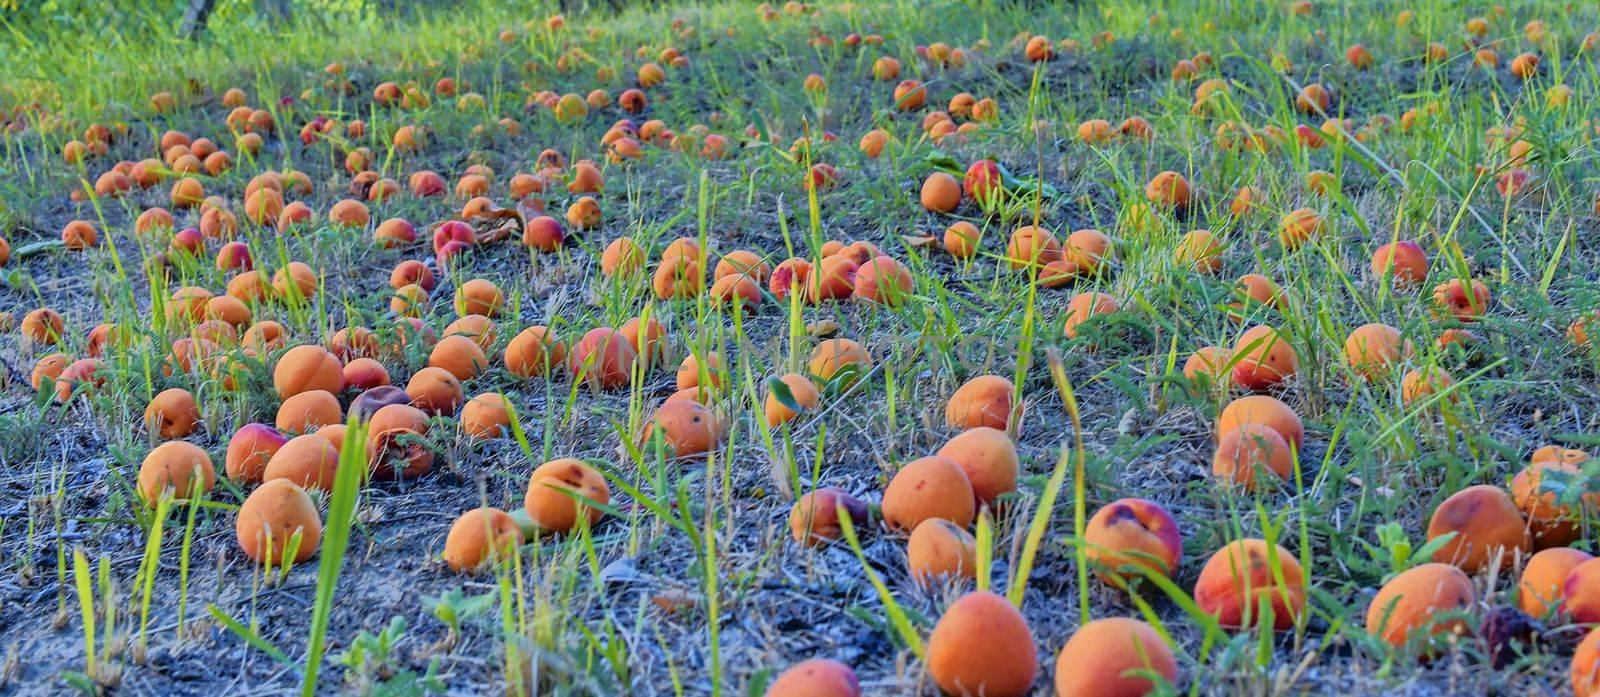 Fallen and rotten apricots on grass. Rural and summer concept by roman_nerud